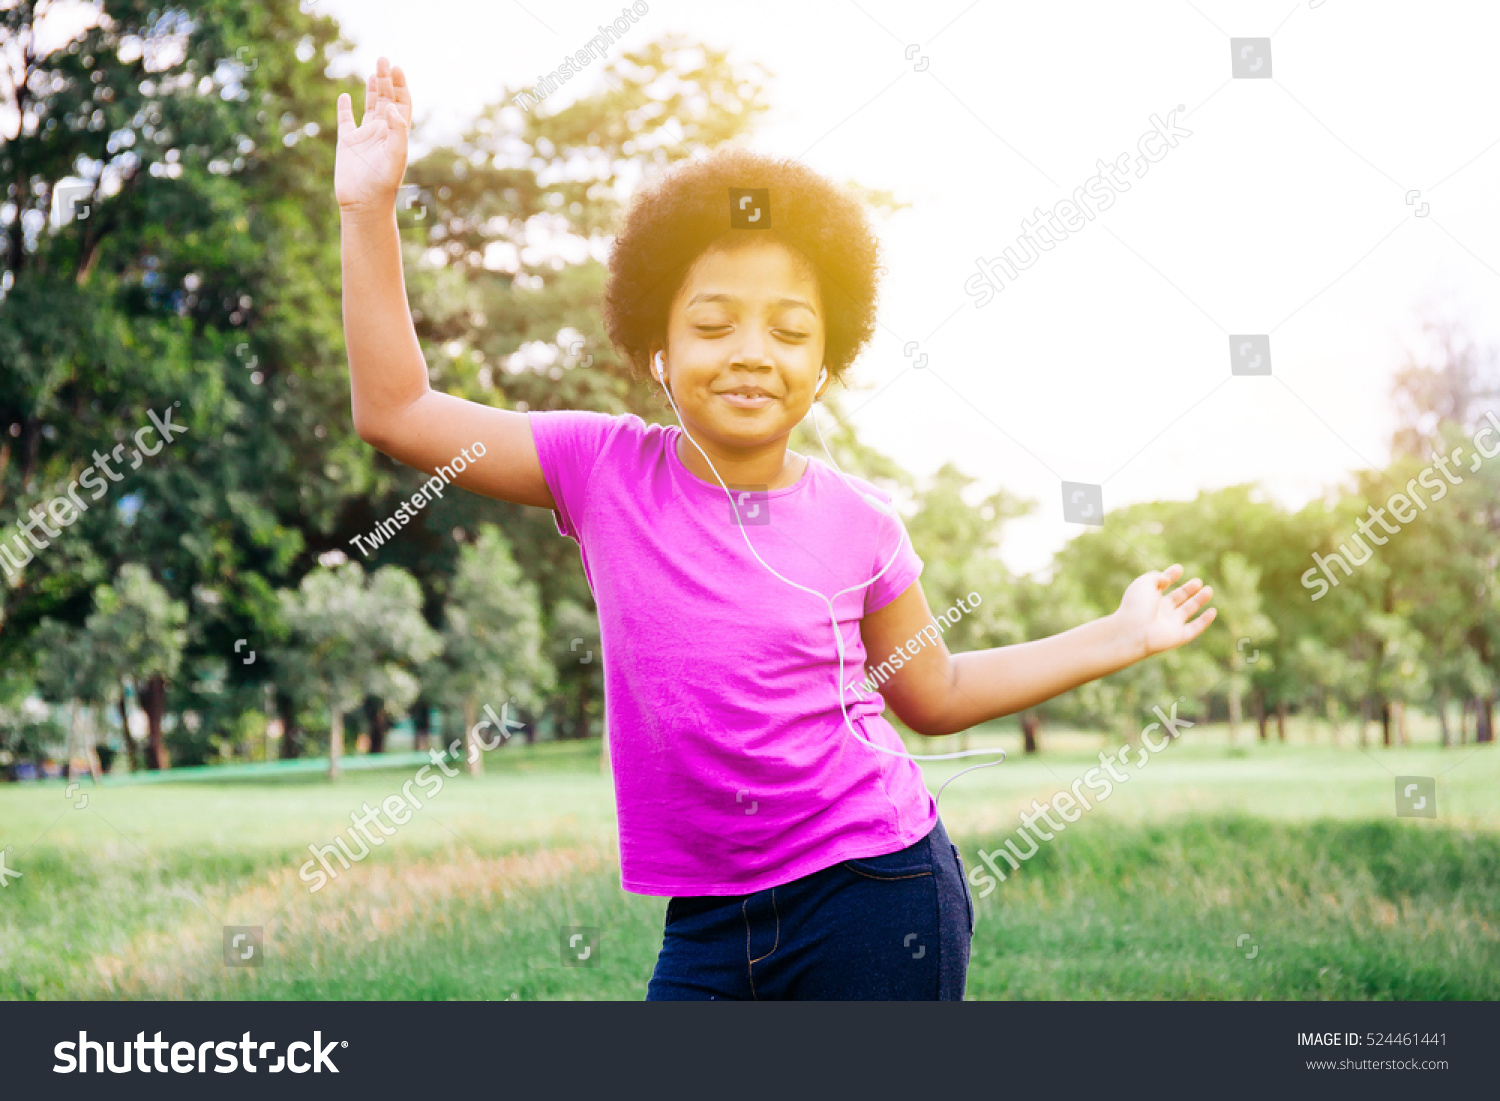 Little kid dancing and listening to music in green park #524461441